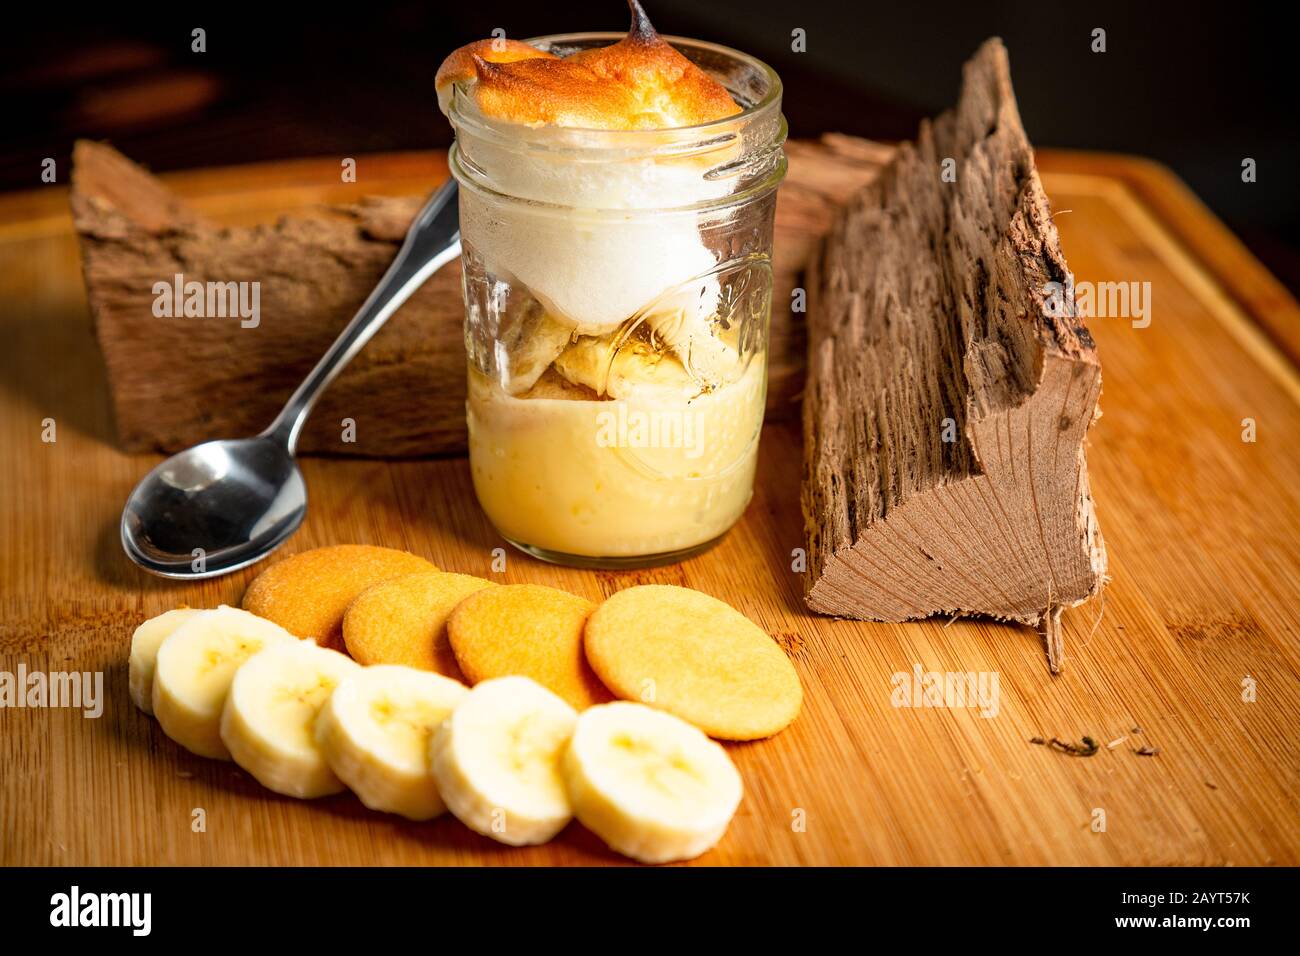 Banana Nilla Wafer Pudding Desert on Wood Cutting Board with Spoon Food Photography Stock Photo